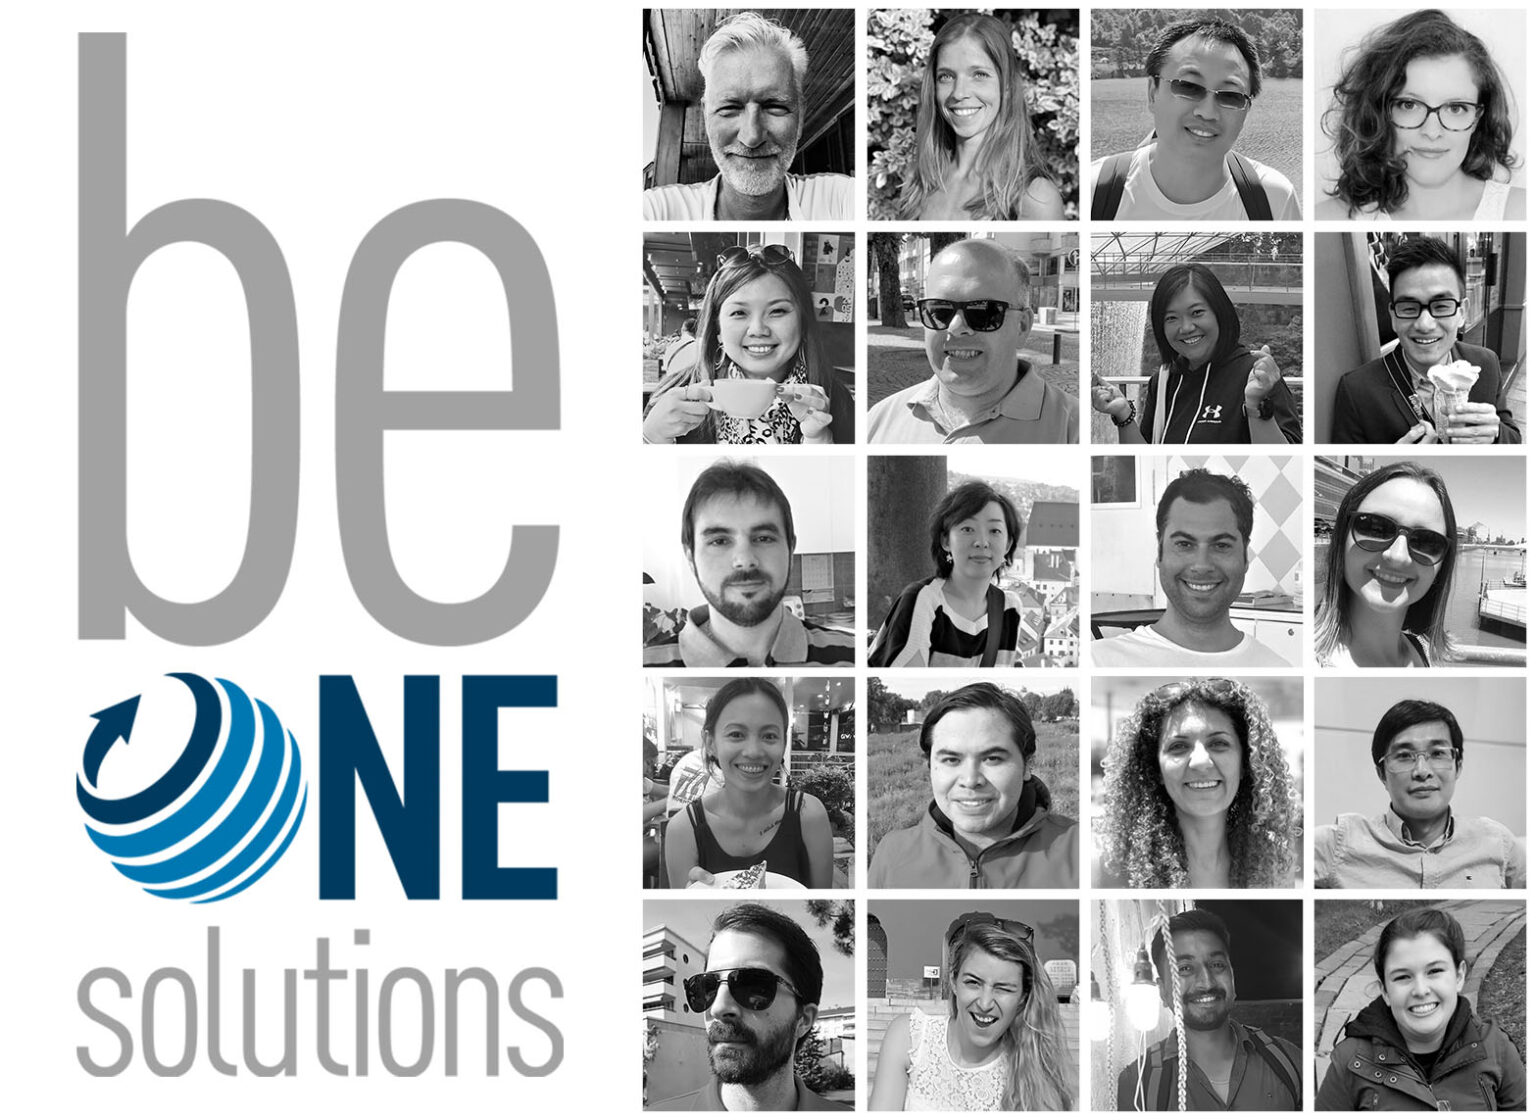 Be one solutions Team